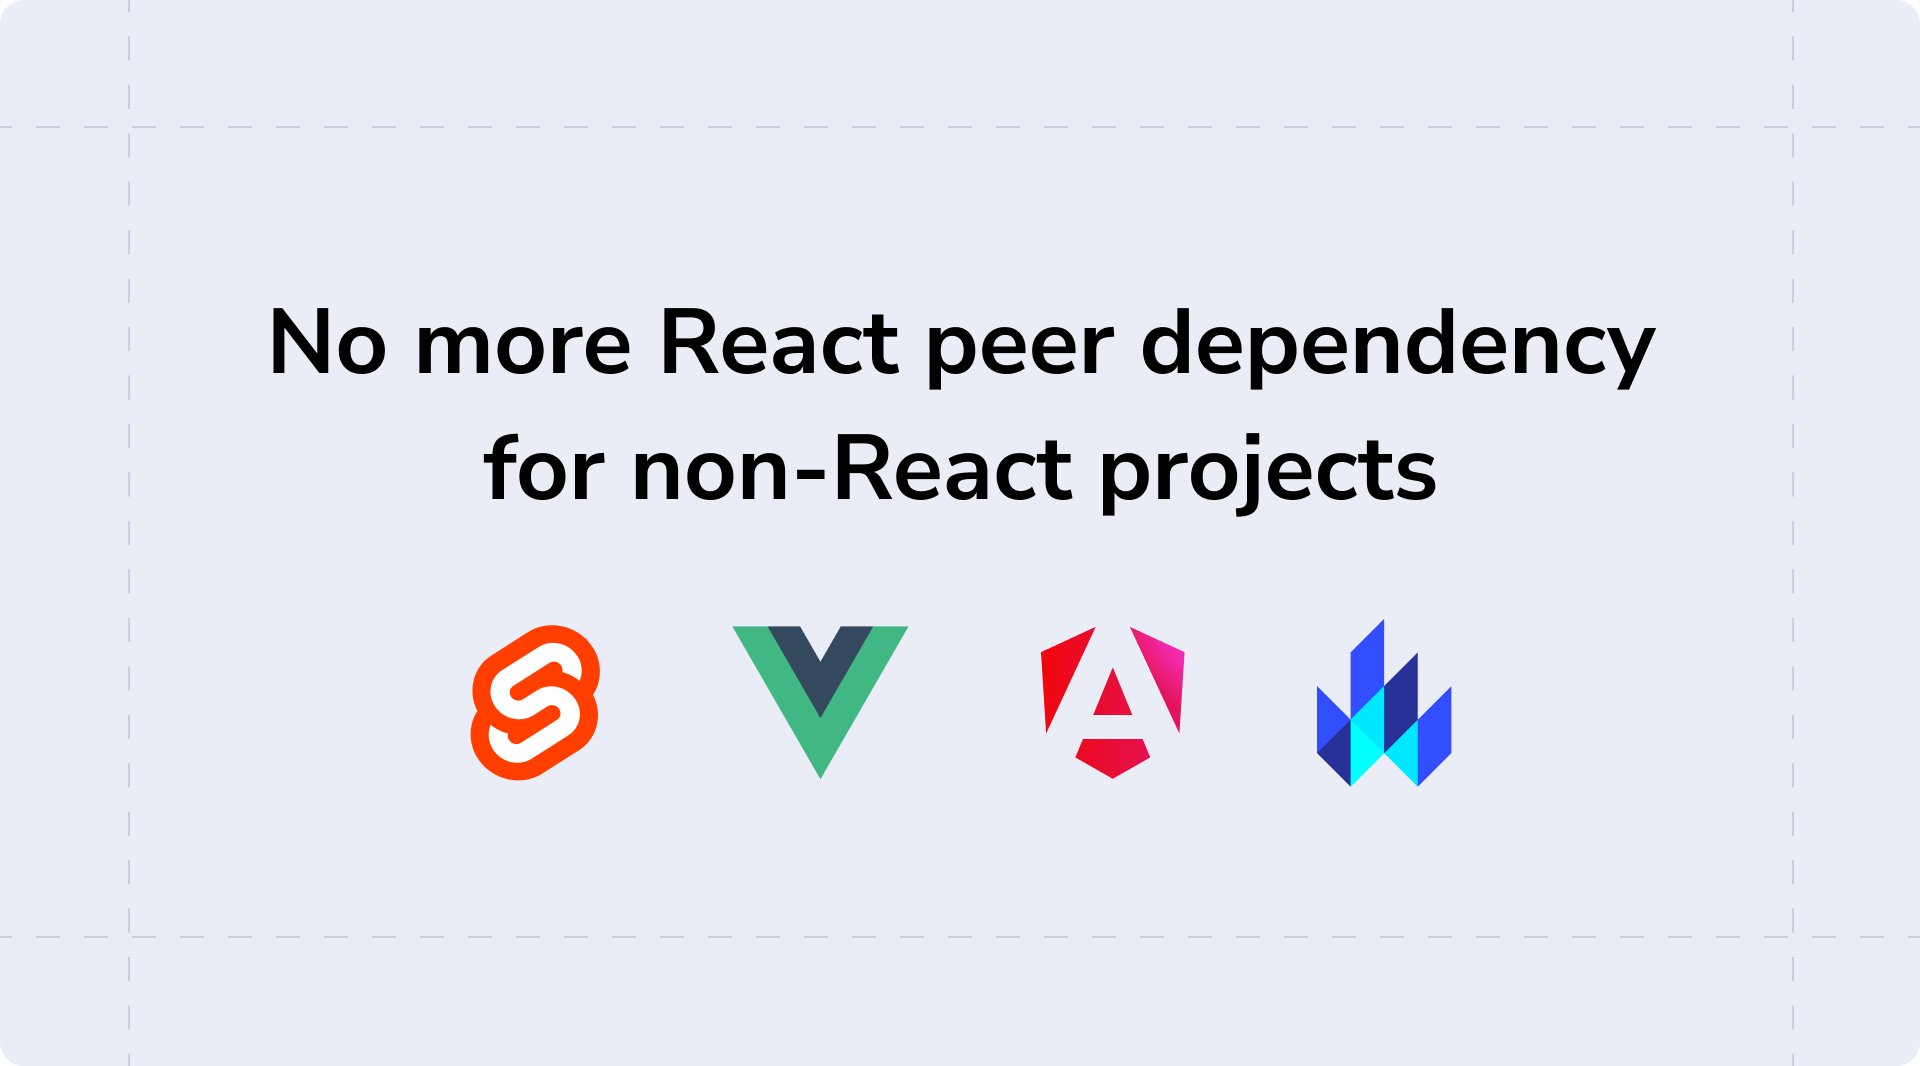 No more React peer dependency for non-React projects